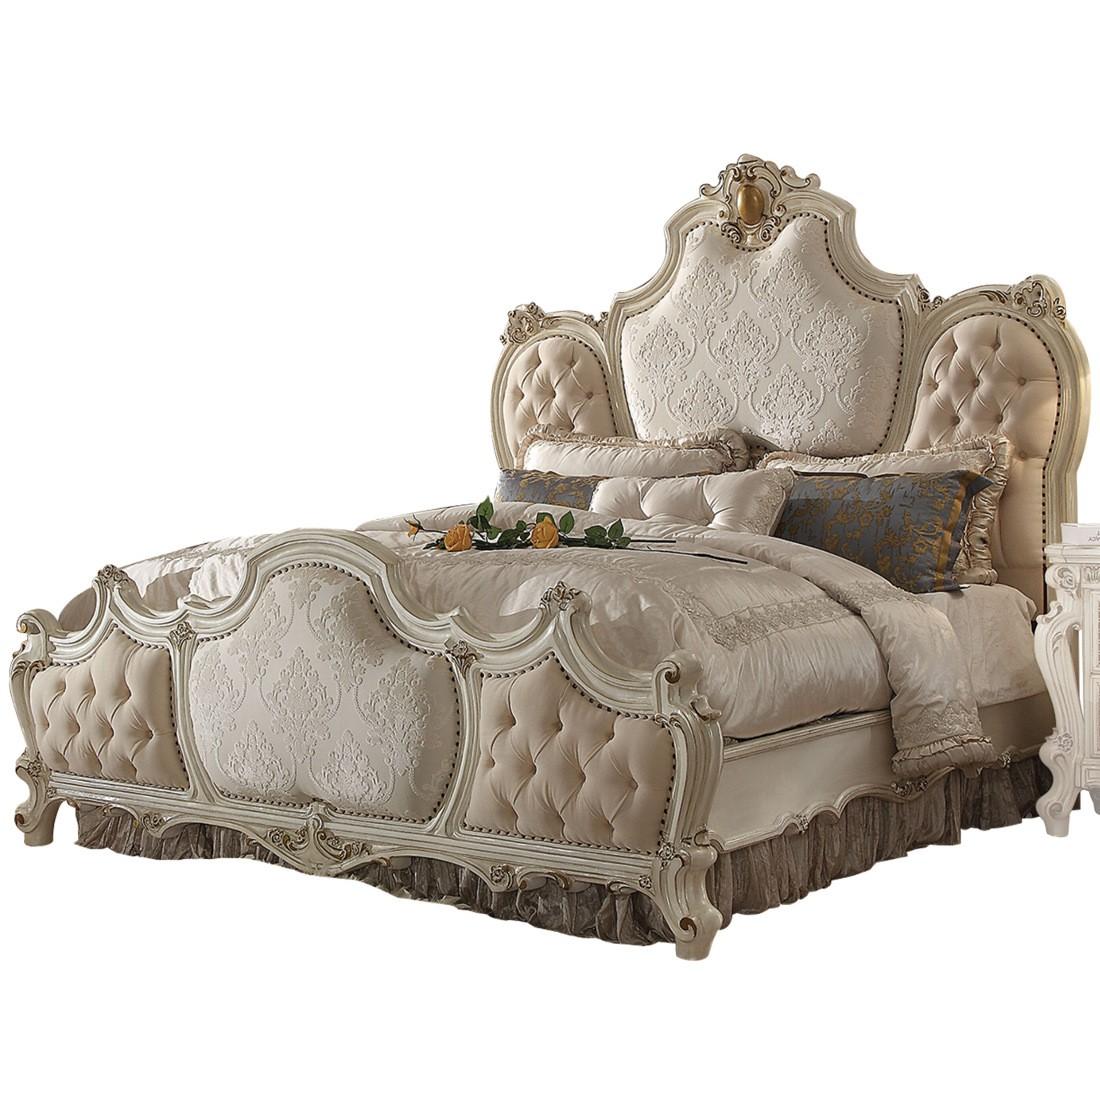 Classic, Traditional Panel Bed Picardy-26880Q Picardy-26880Q in Pearl, Antique Fabric